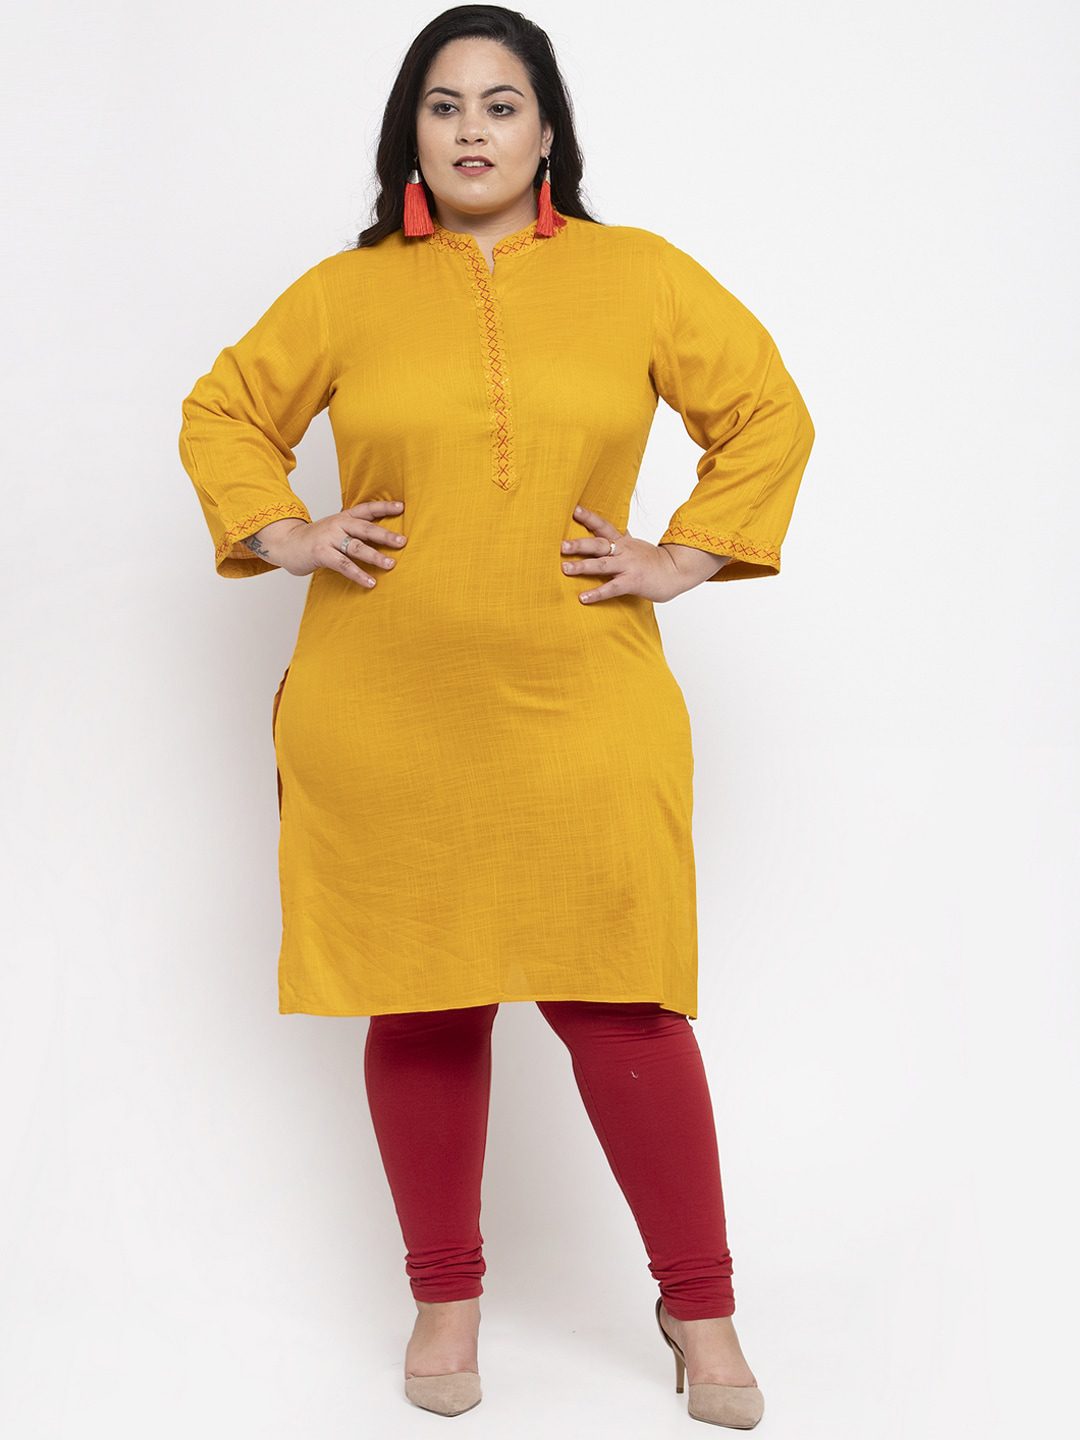 Details more than 89 yellow kurti with blue jeans super hot  thtantai2